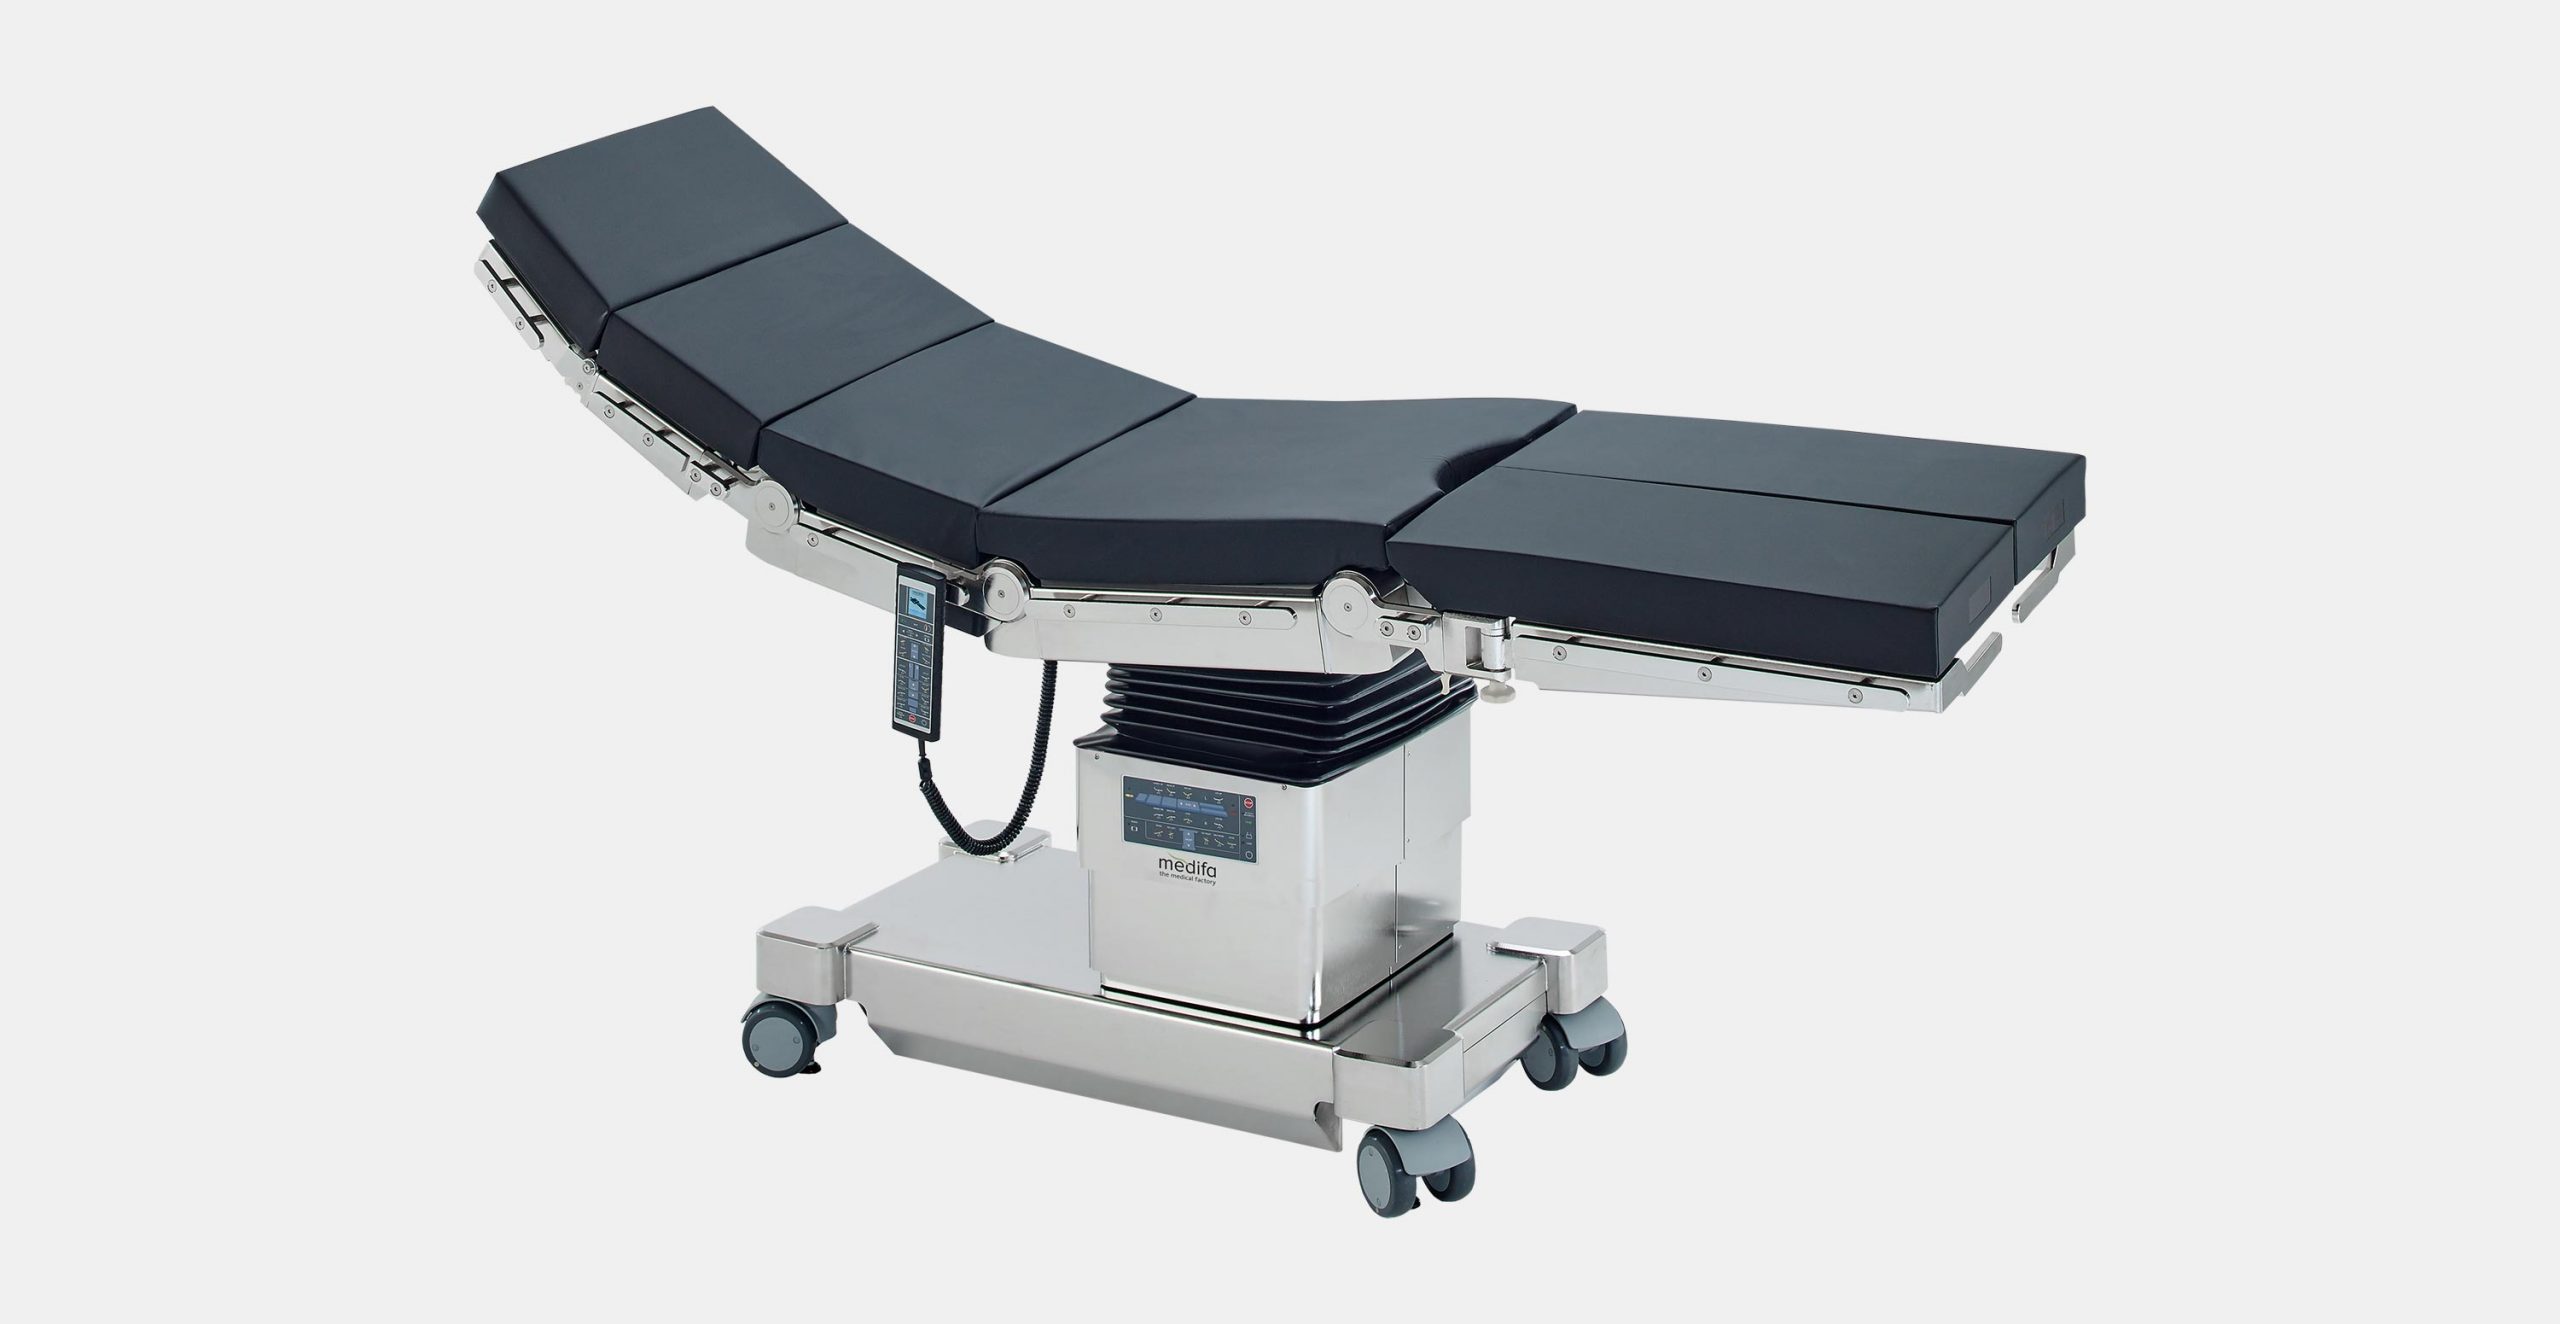 medifa_700300_mobile_electric_operating_table